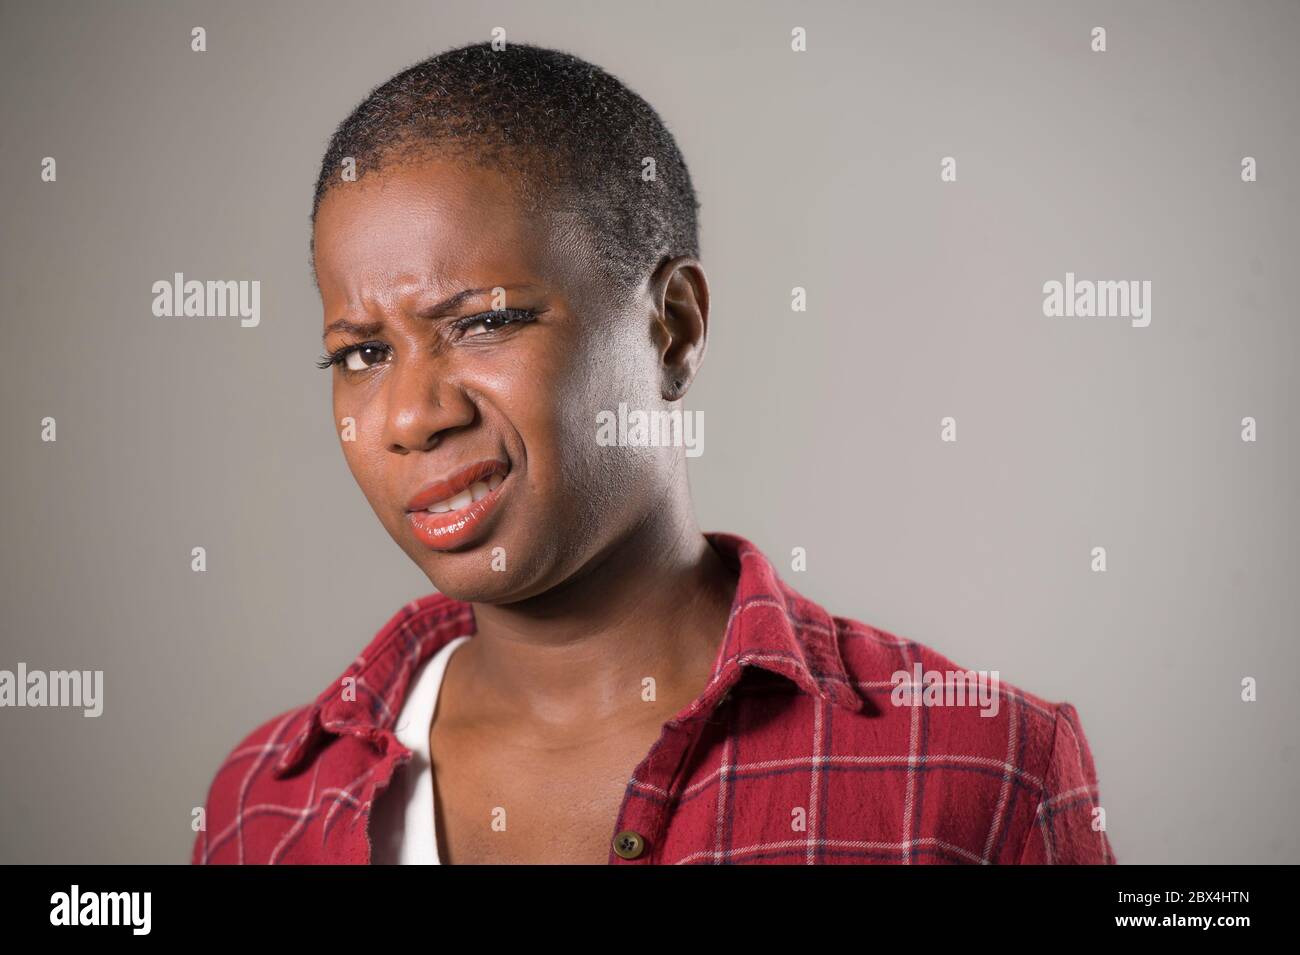 lifestyle-portrait-if-young-unhappy-and-pretty-afro-american-woman-in-contempt-and-disgust-face-expression-as-if-disliking-or-finding-disgusting-isola-2BX4HTN.jpg